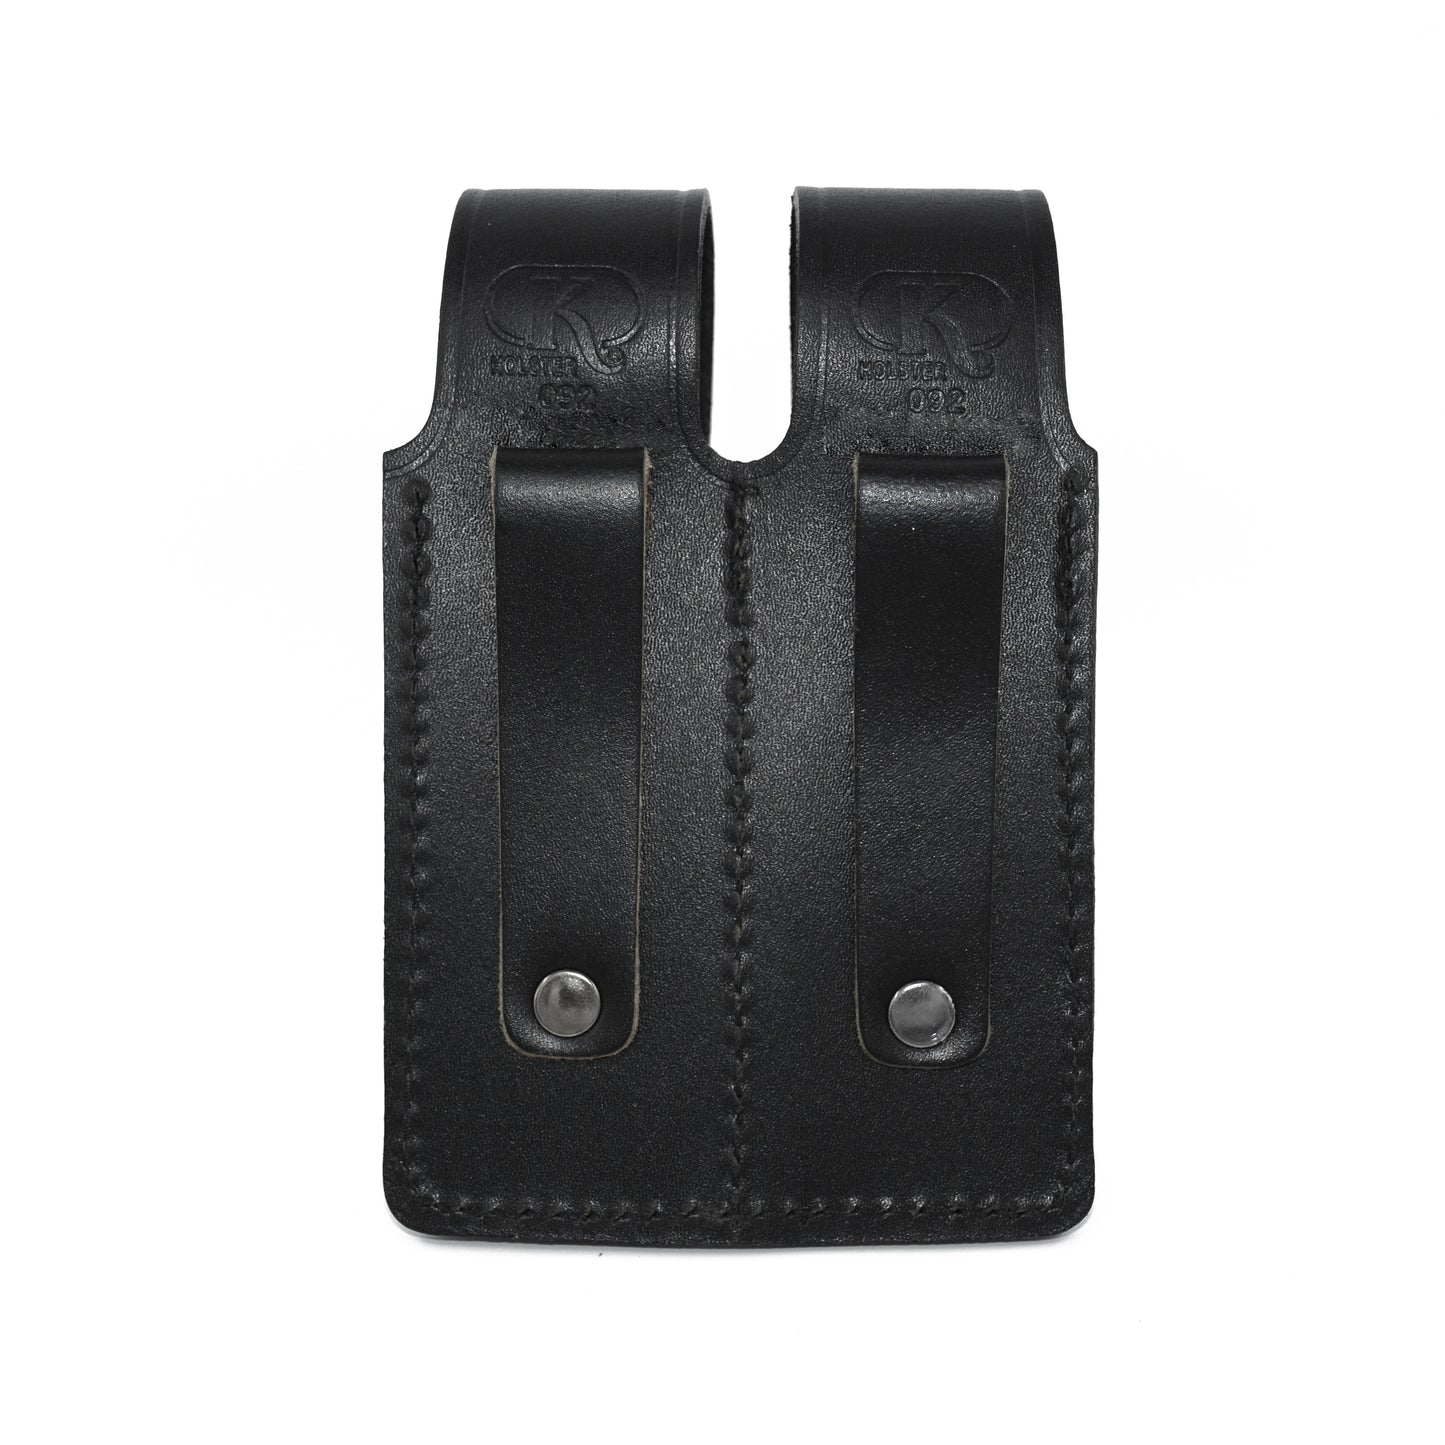 K45206 Leather Vertical Shoulder Holster with Soft Fabric Interior Lining RH Double Magazine Pouch for Beretta CZ 75 Ruger Browning HP Sig Sauer P226